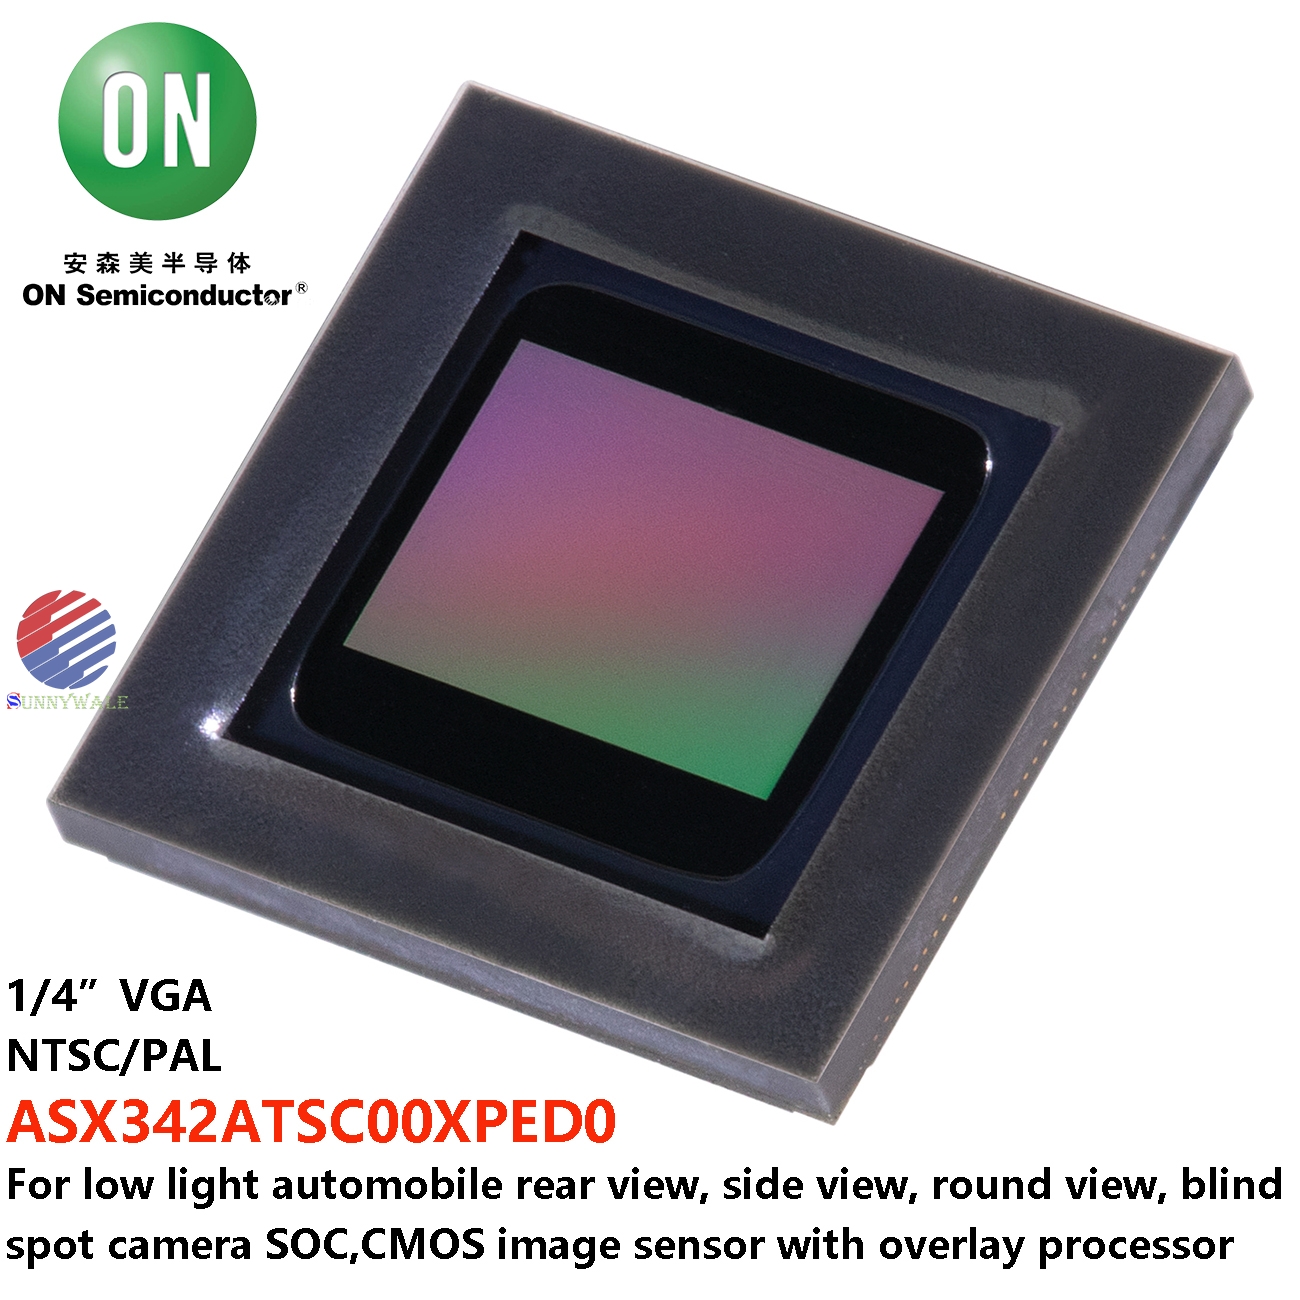 ASX342ATSC00XPED0, ONSEMI 1/4 inch VGA color CMOS, NTSC/PAL, CMOS with good low light effect, rear view and side view blind spot 360-degree panoramic camera chip, automotive image sensor, SOC and overlay processor, ASX340 upgraded productor, MT9V139 replacement